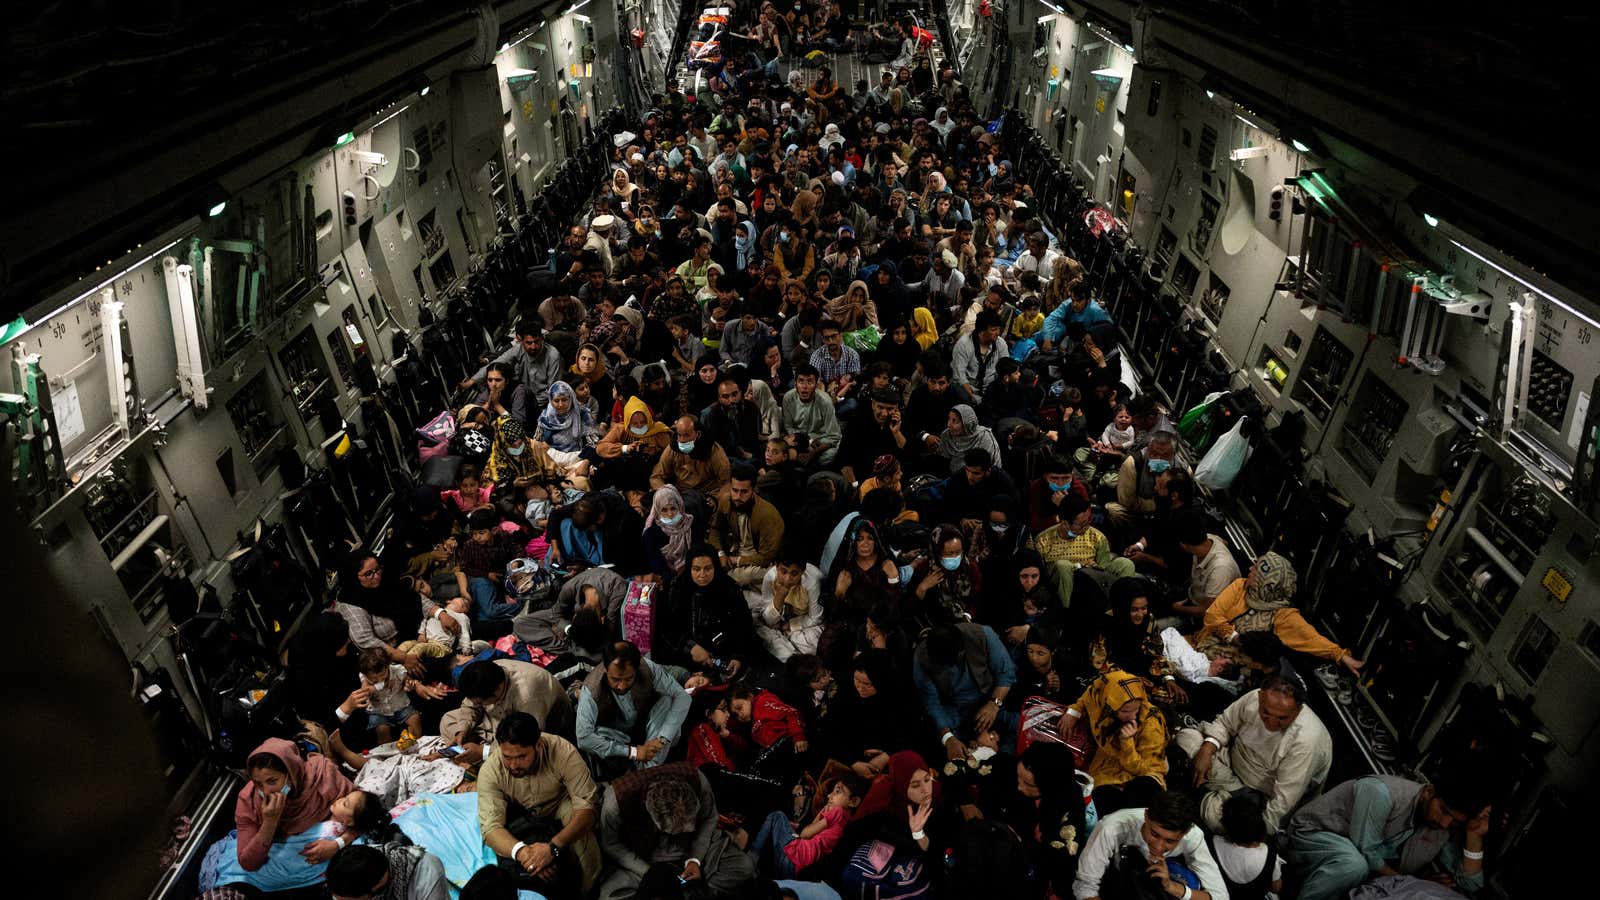 Evacuees from Afghanistan sit inside a military aircraft.